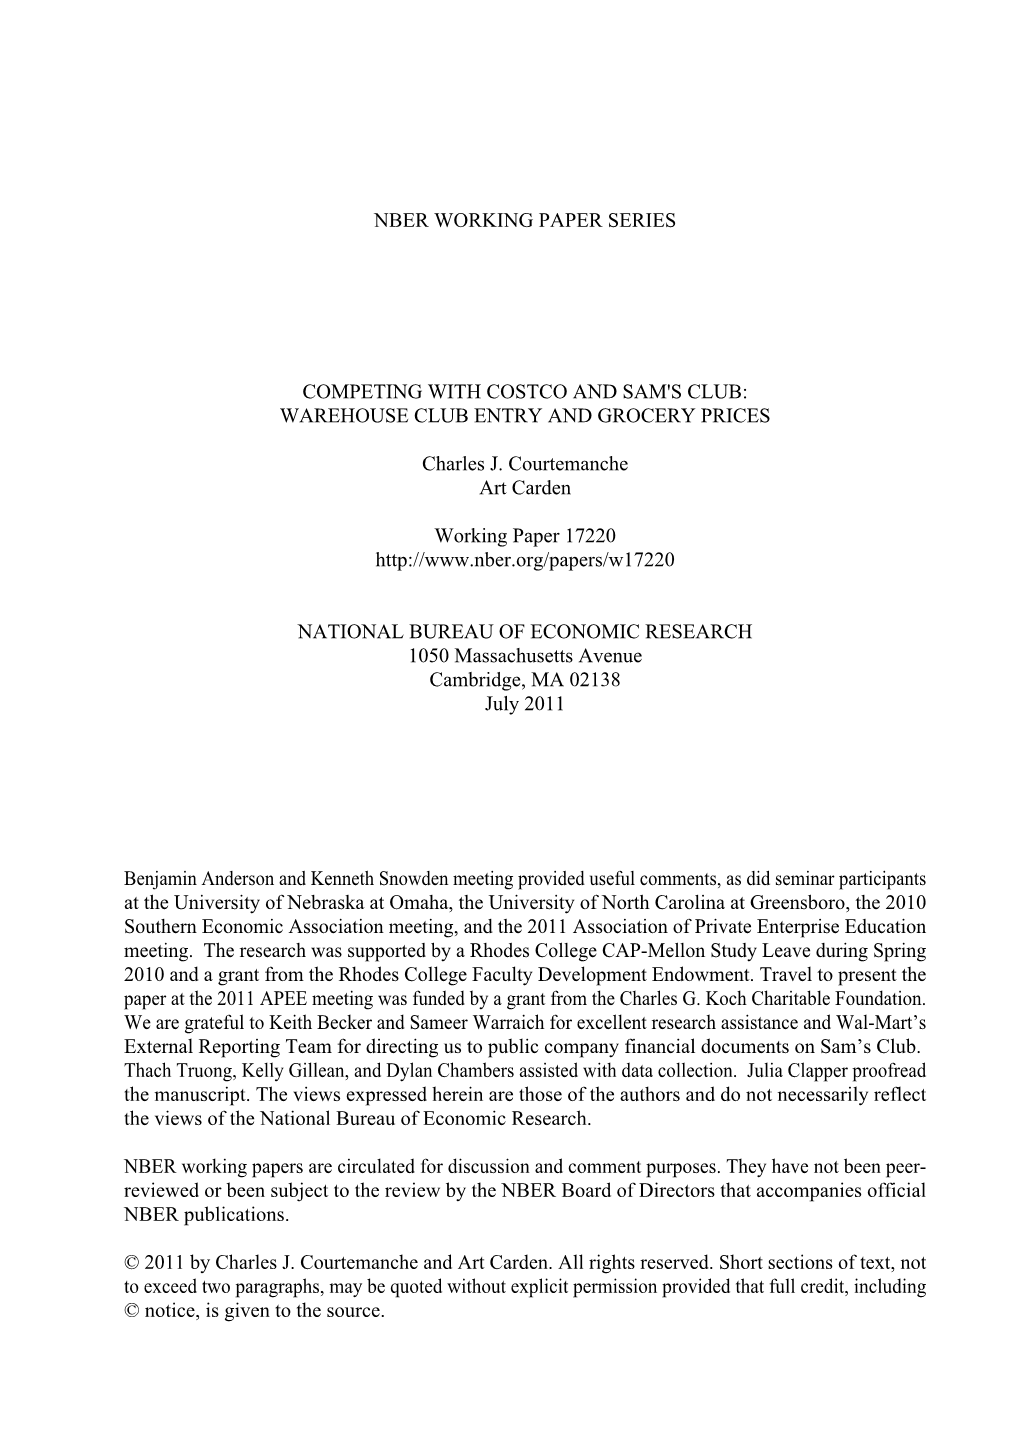 NBER WORKING PAPER SERIES COMPETING with COSTCO and SAM's CLUB: WAREHOUSE CLUB ENTRY and GROCERY PRICES Charles J. Courtemanche